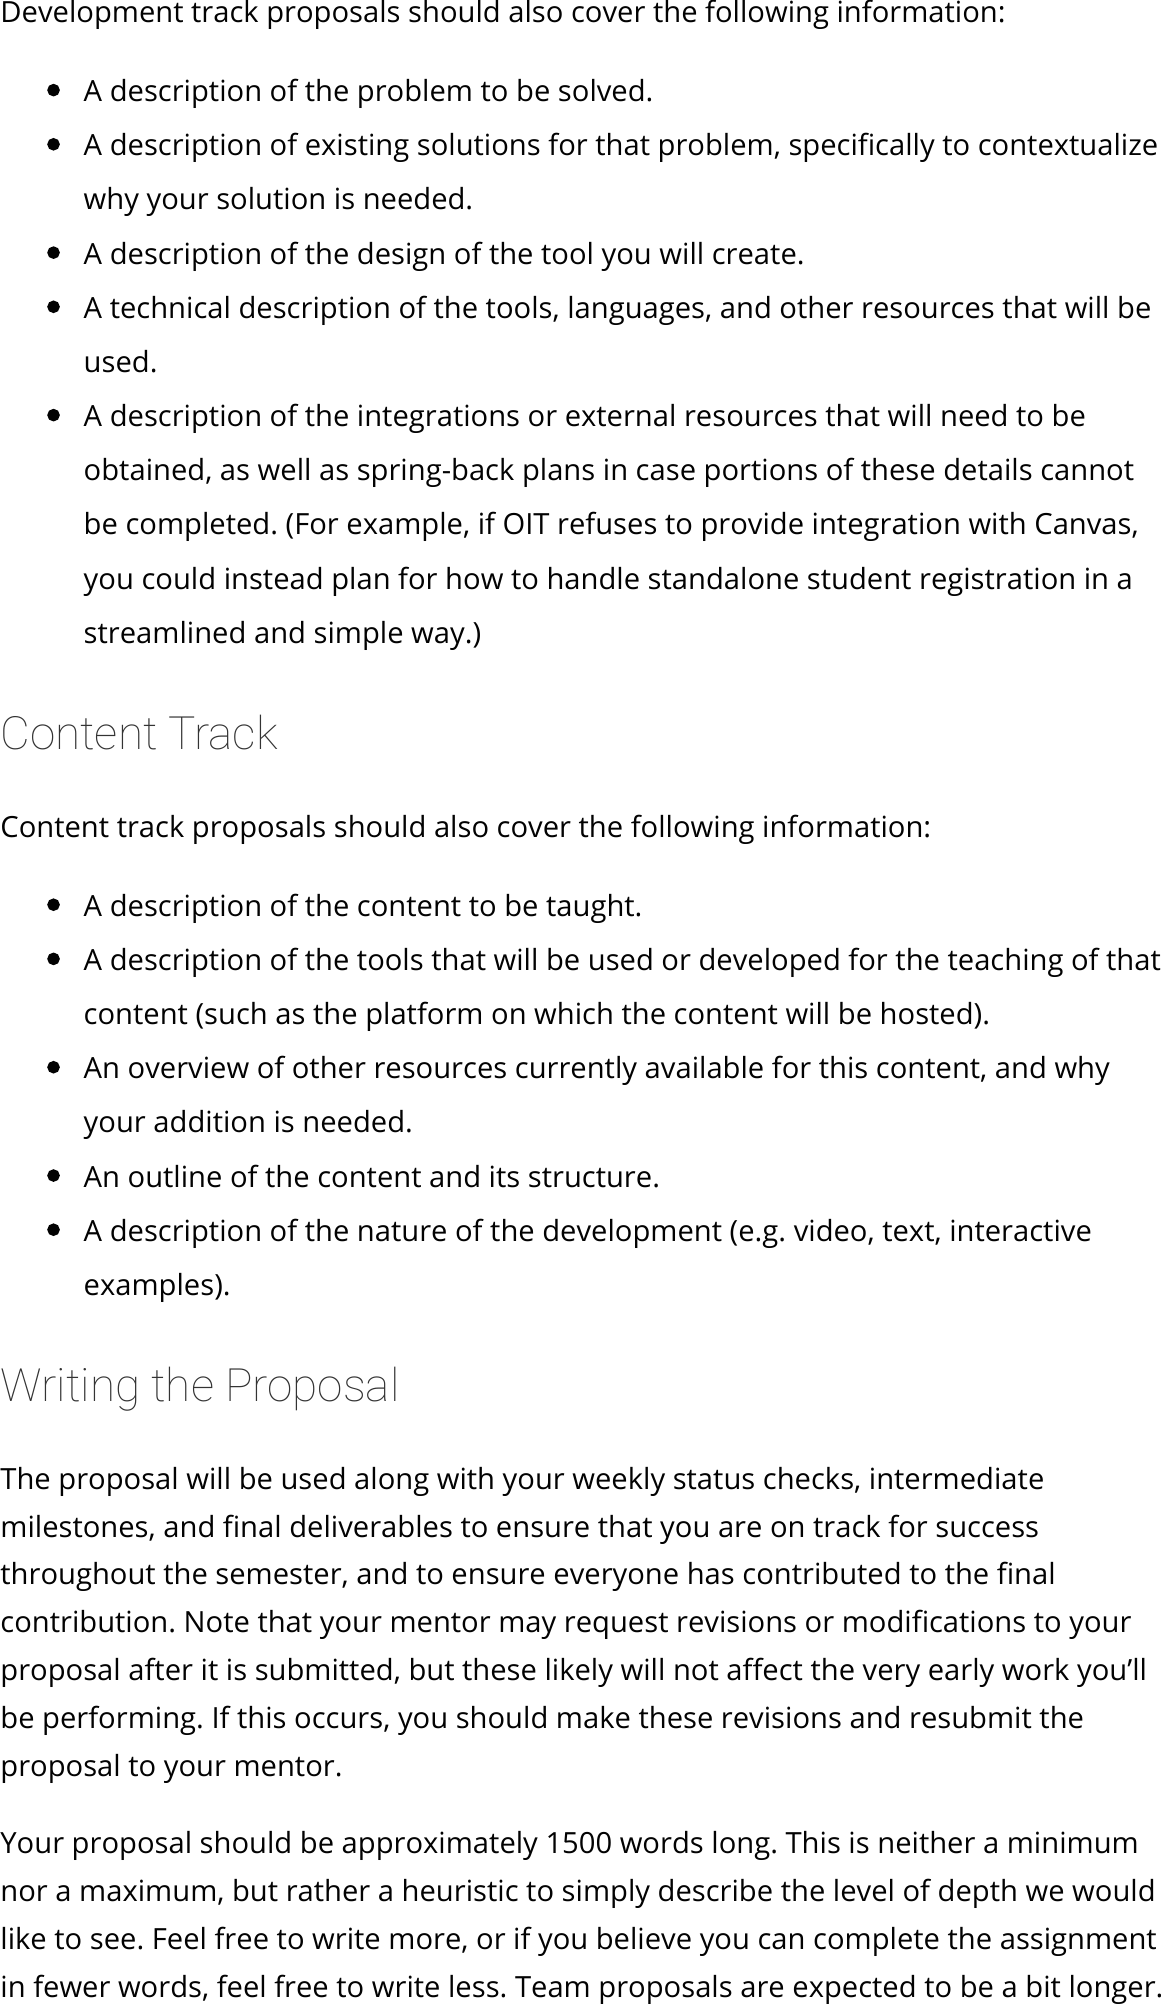 Page 3 of 5 - Instructions-Proposal